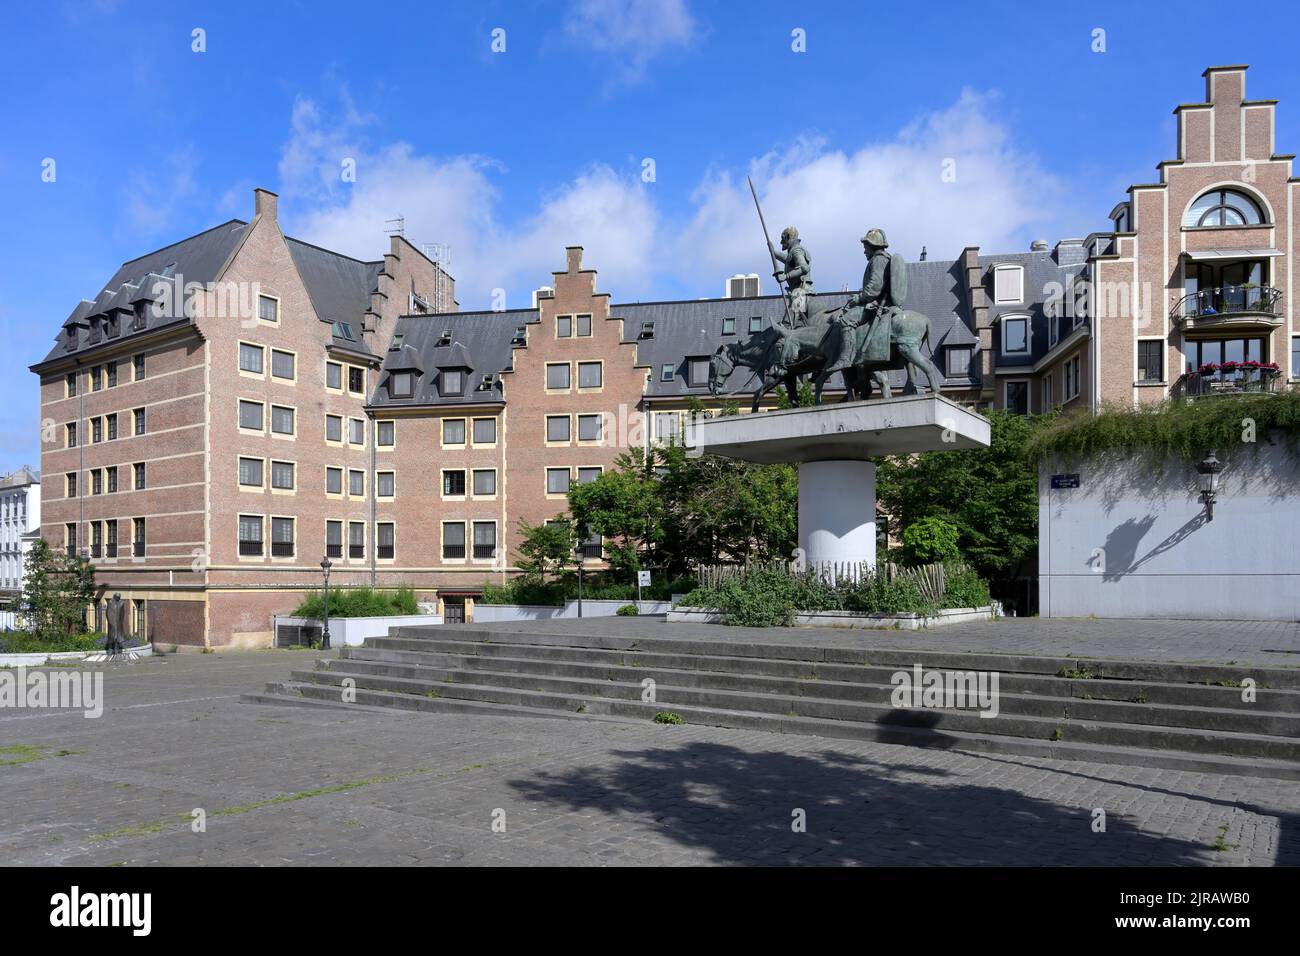 Spanish square with the statue of Don Quichotte and Sancho Panza, Brussels, Brabant, Belgium Stock Photo